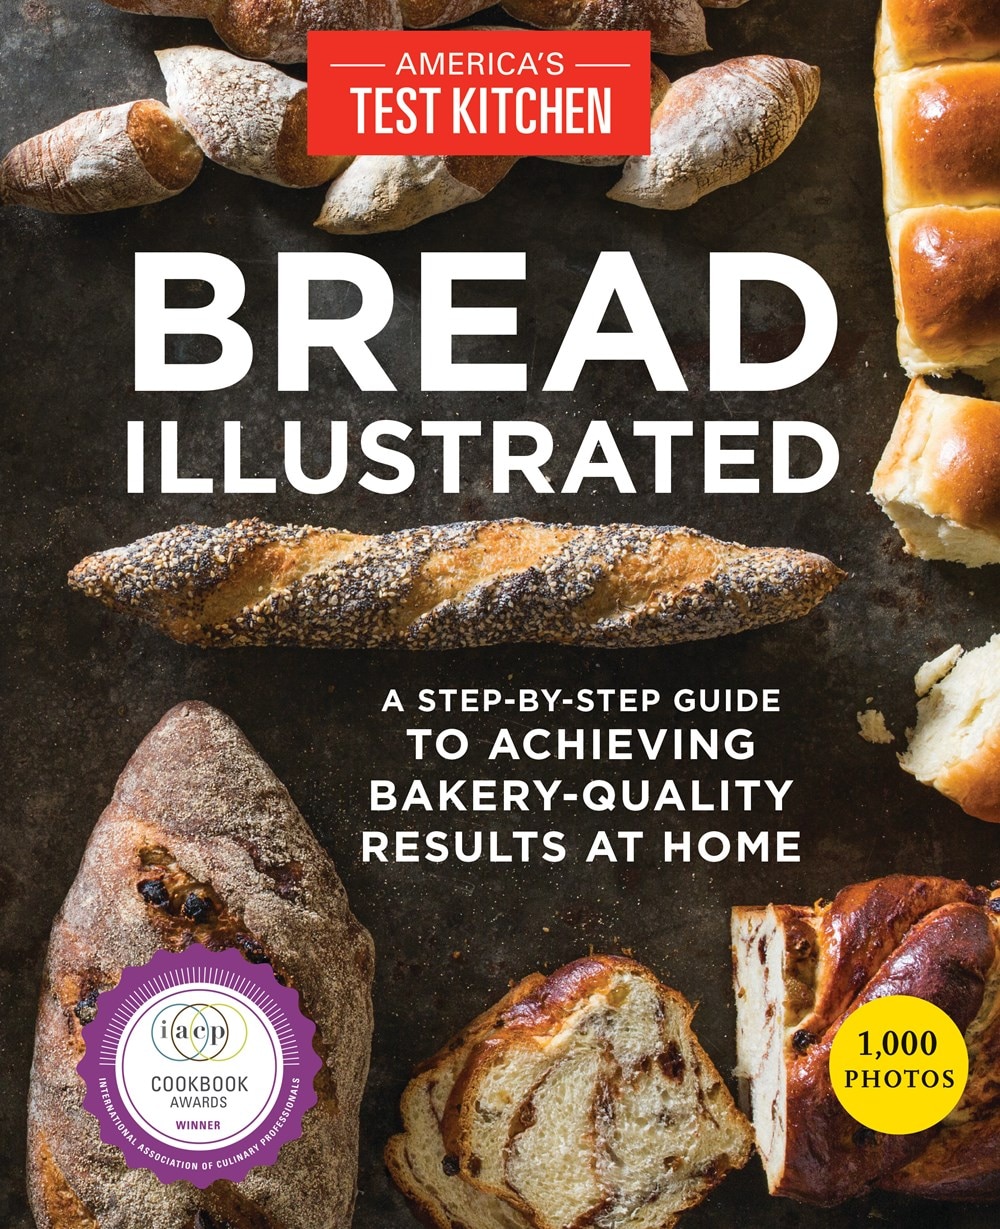 Bread Illustrated: A Step-By-Step Guide to Achieving Bakery-Quality Results at Home